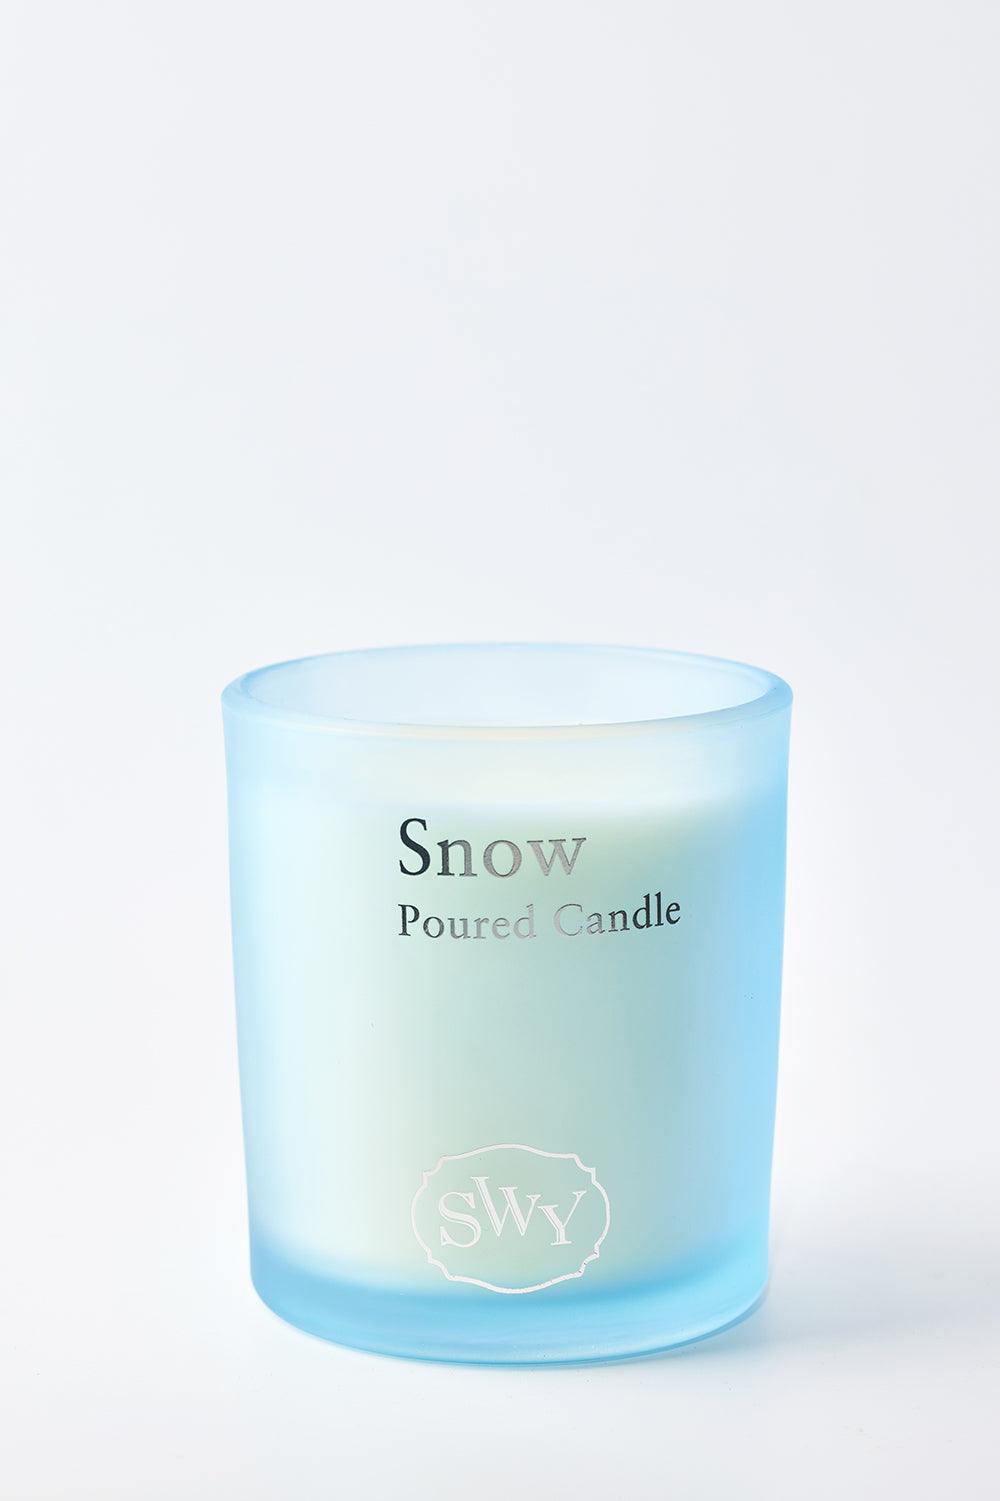 Poured Candle – Snow - SWY - Scent With You